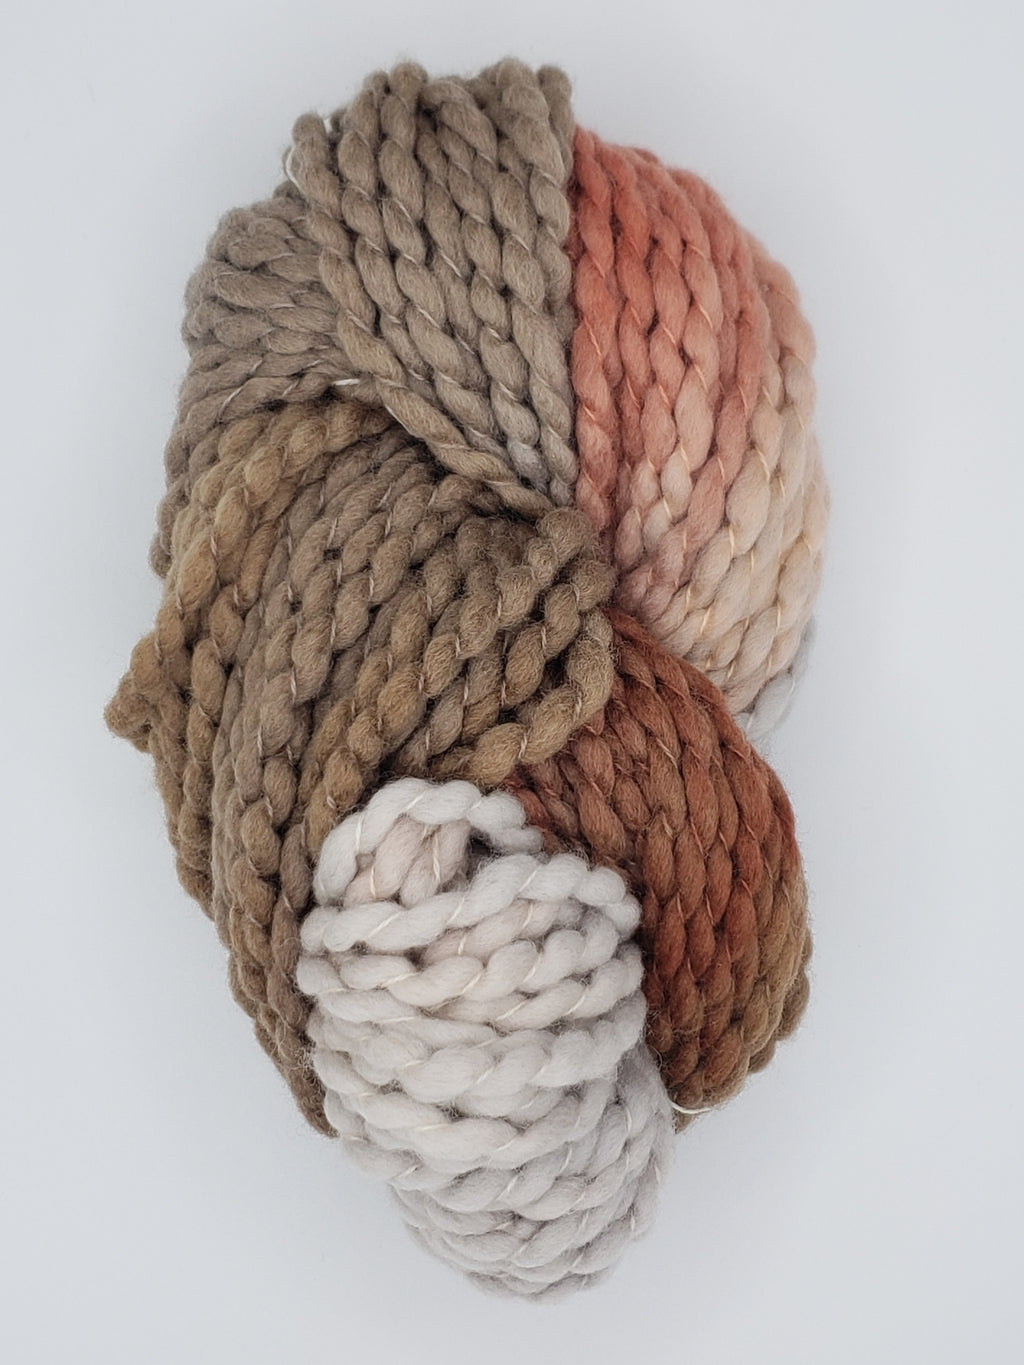 Crimp - CHAI LATTE - Hand Dyed Chunky Textured Yarn - Landscape Shades